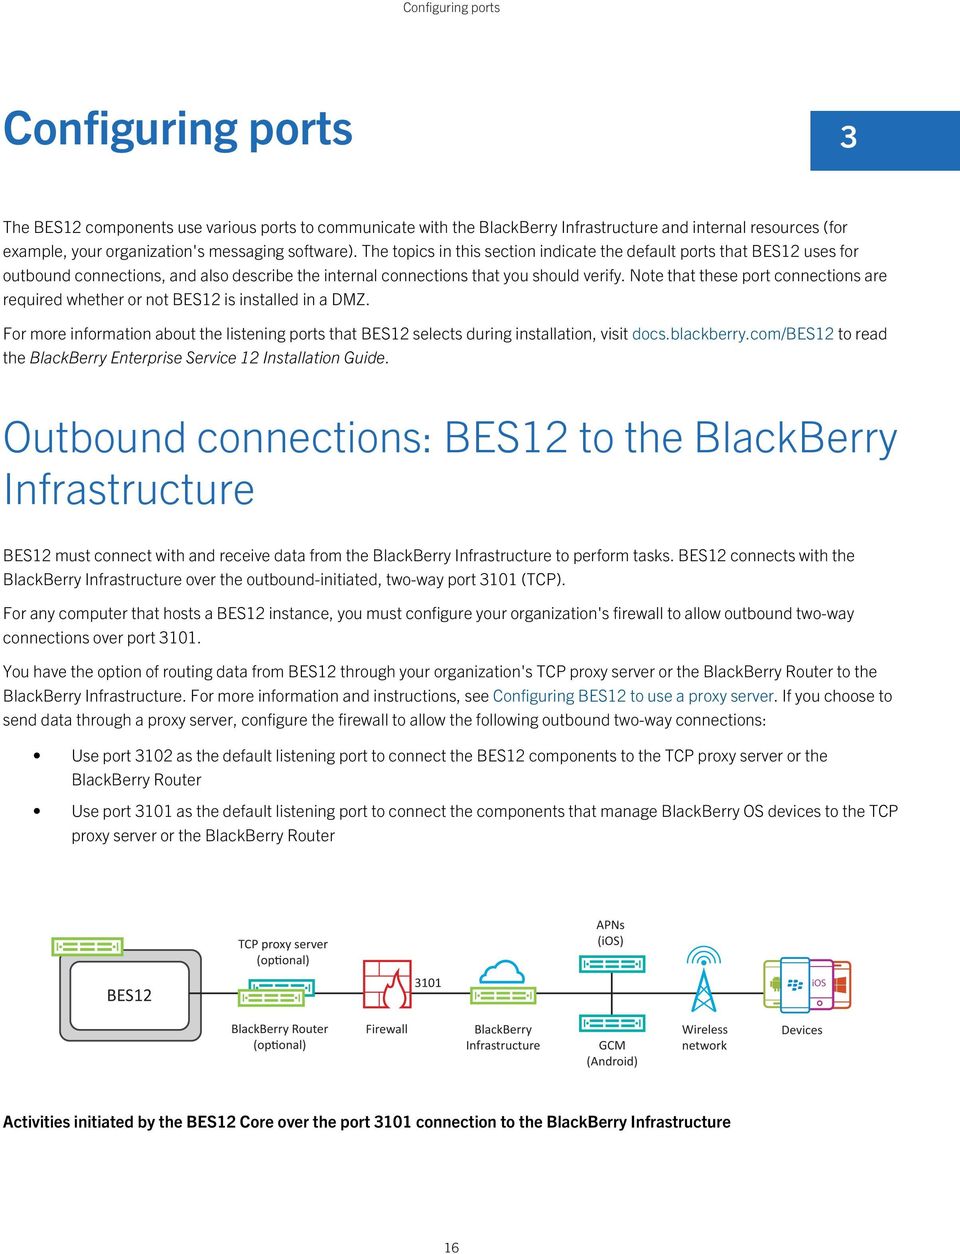 Note that these port connections are required whether or not BES12 is installed in a DMZ. For more information about the listening ports that BES12 selects during installation, visit docs.blackberry.